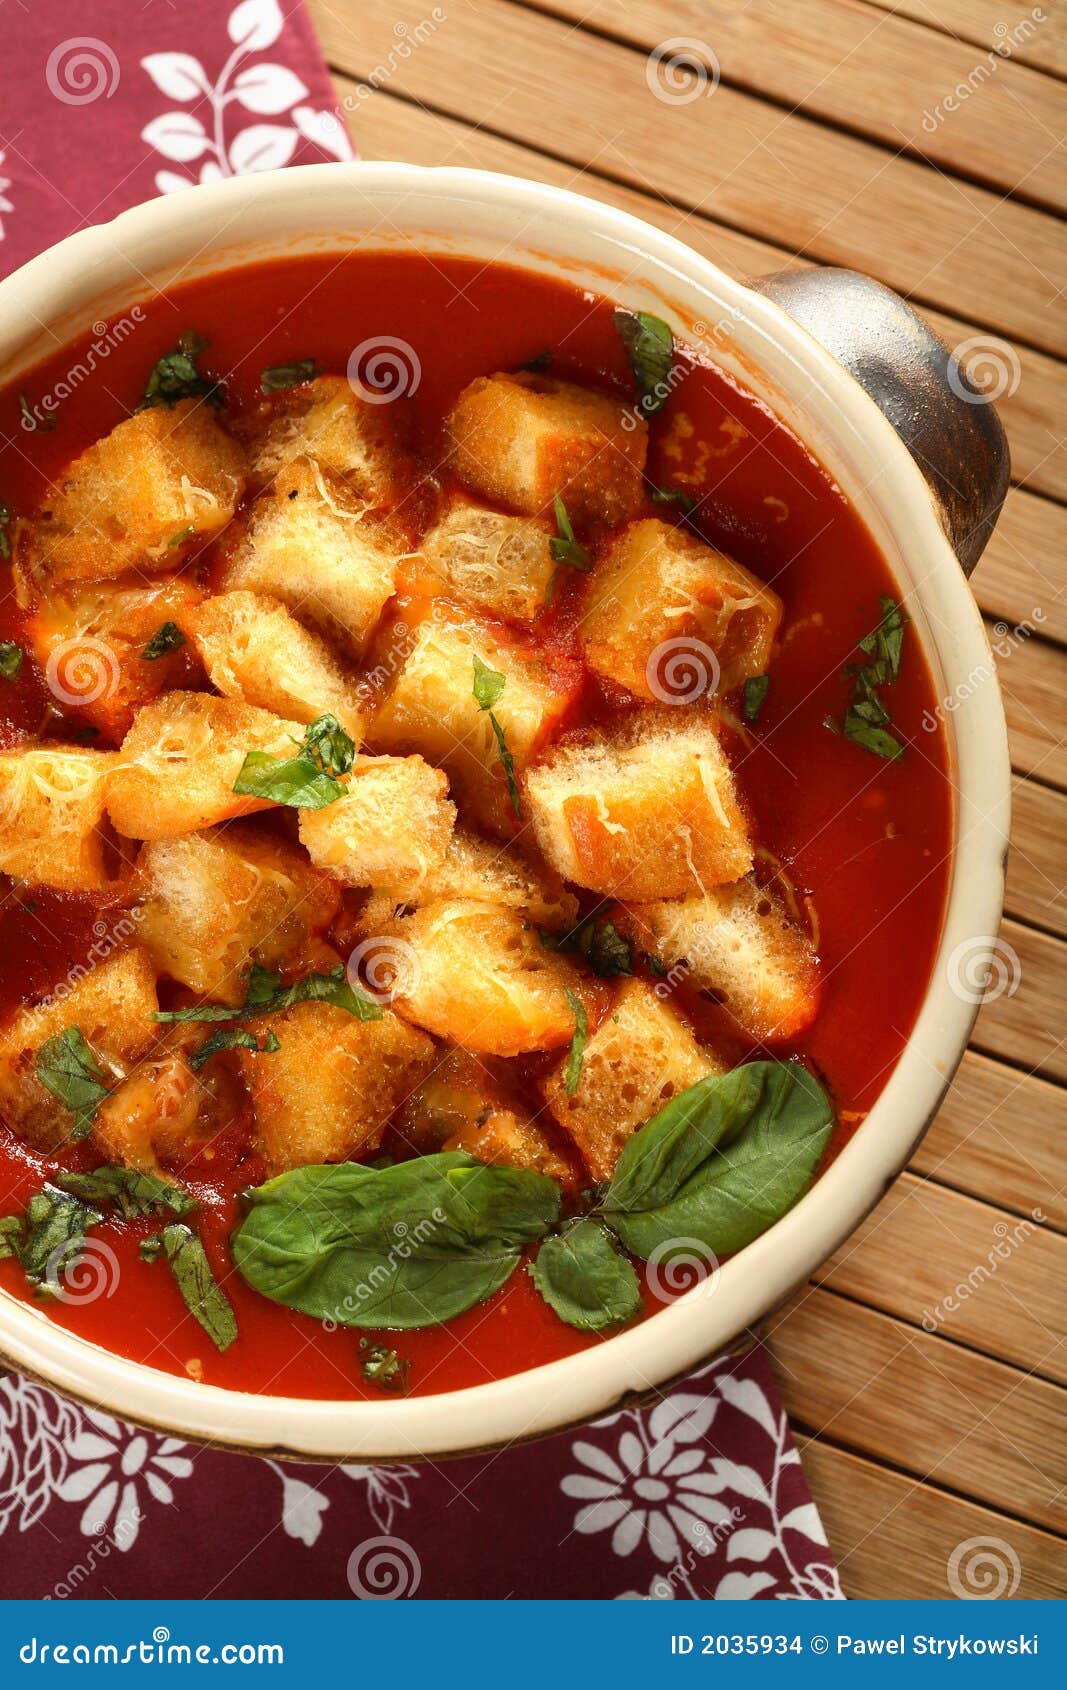 https://thumbs.dreamstime.com/z/tomatoes-soup-plate-2035934.jpg